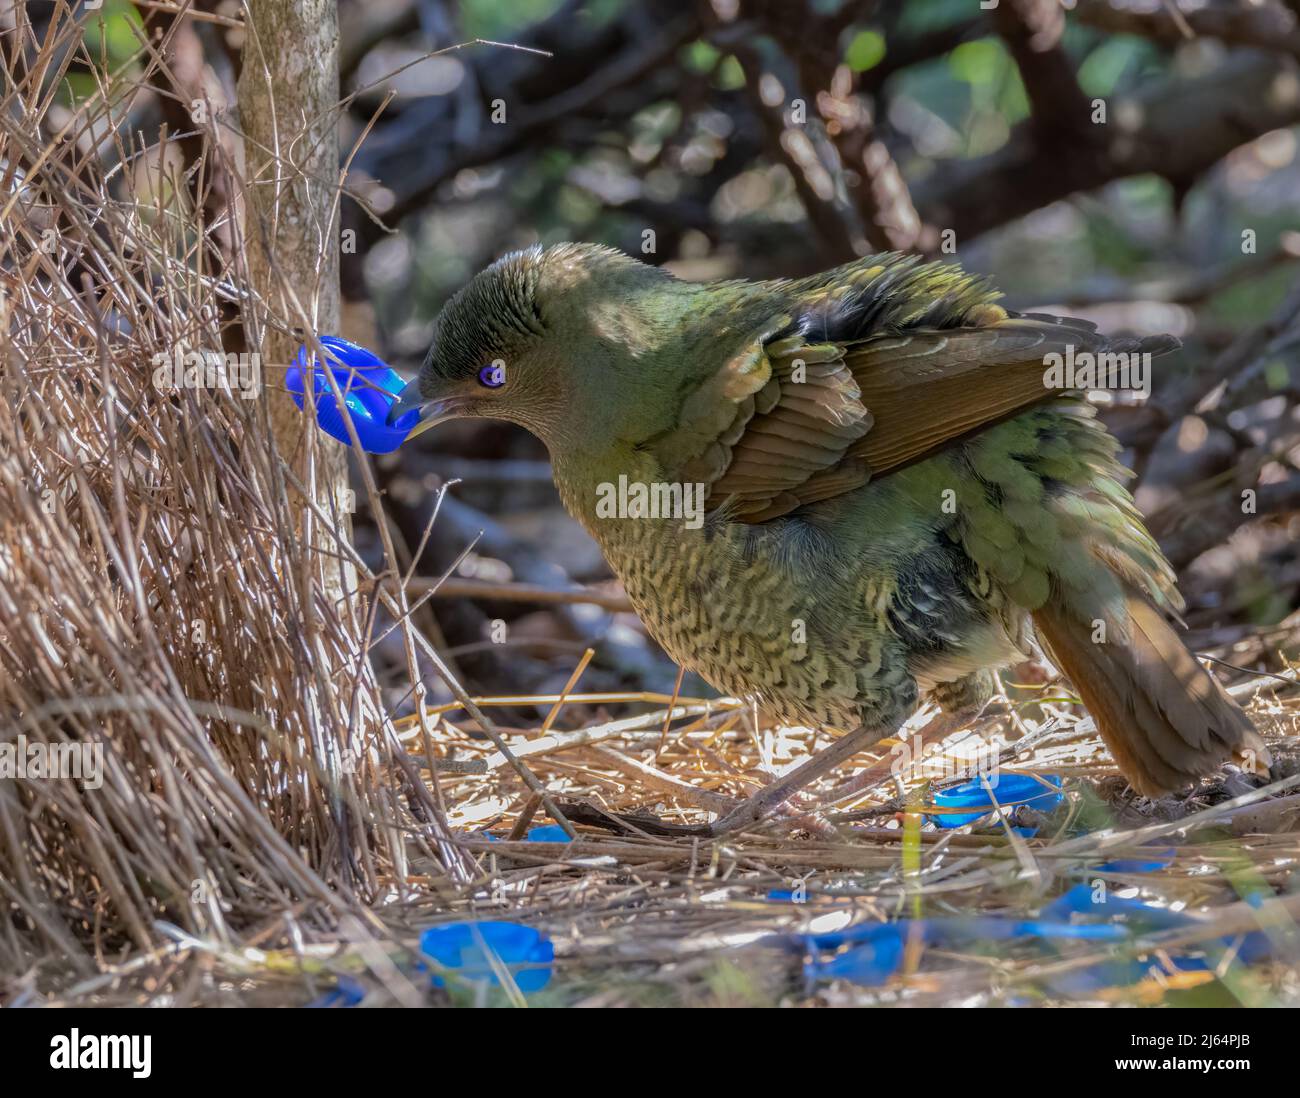 a female satin bowerbird bower holding a blue bottle cap at a bower in a forest Stock Photo